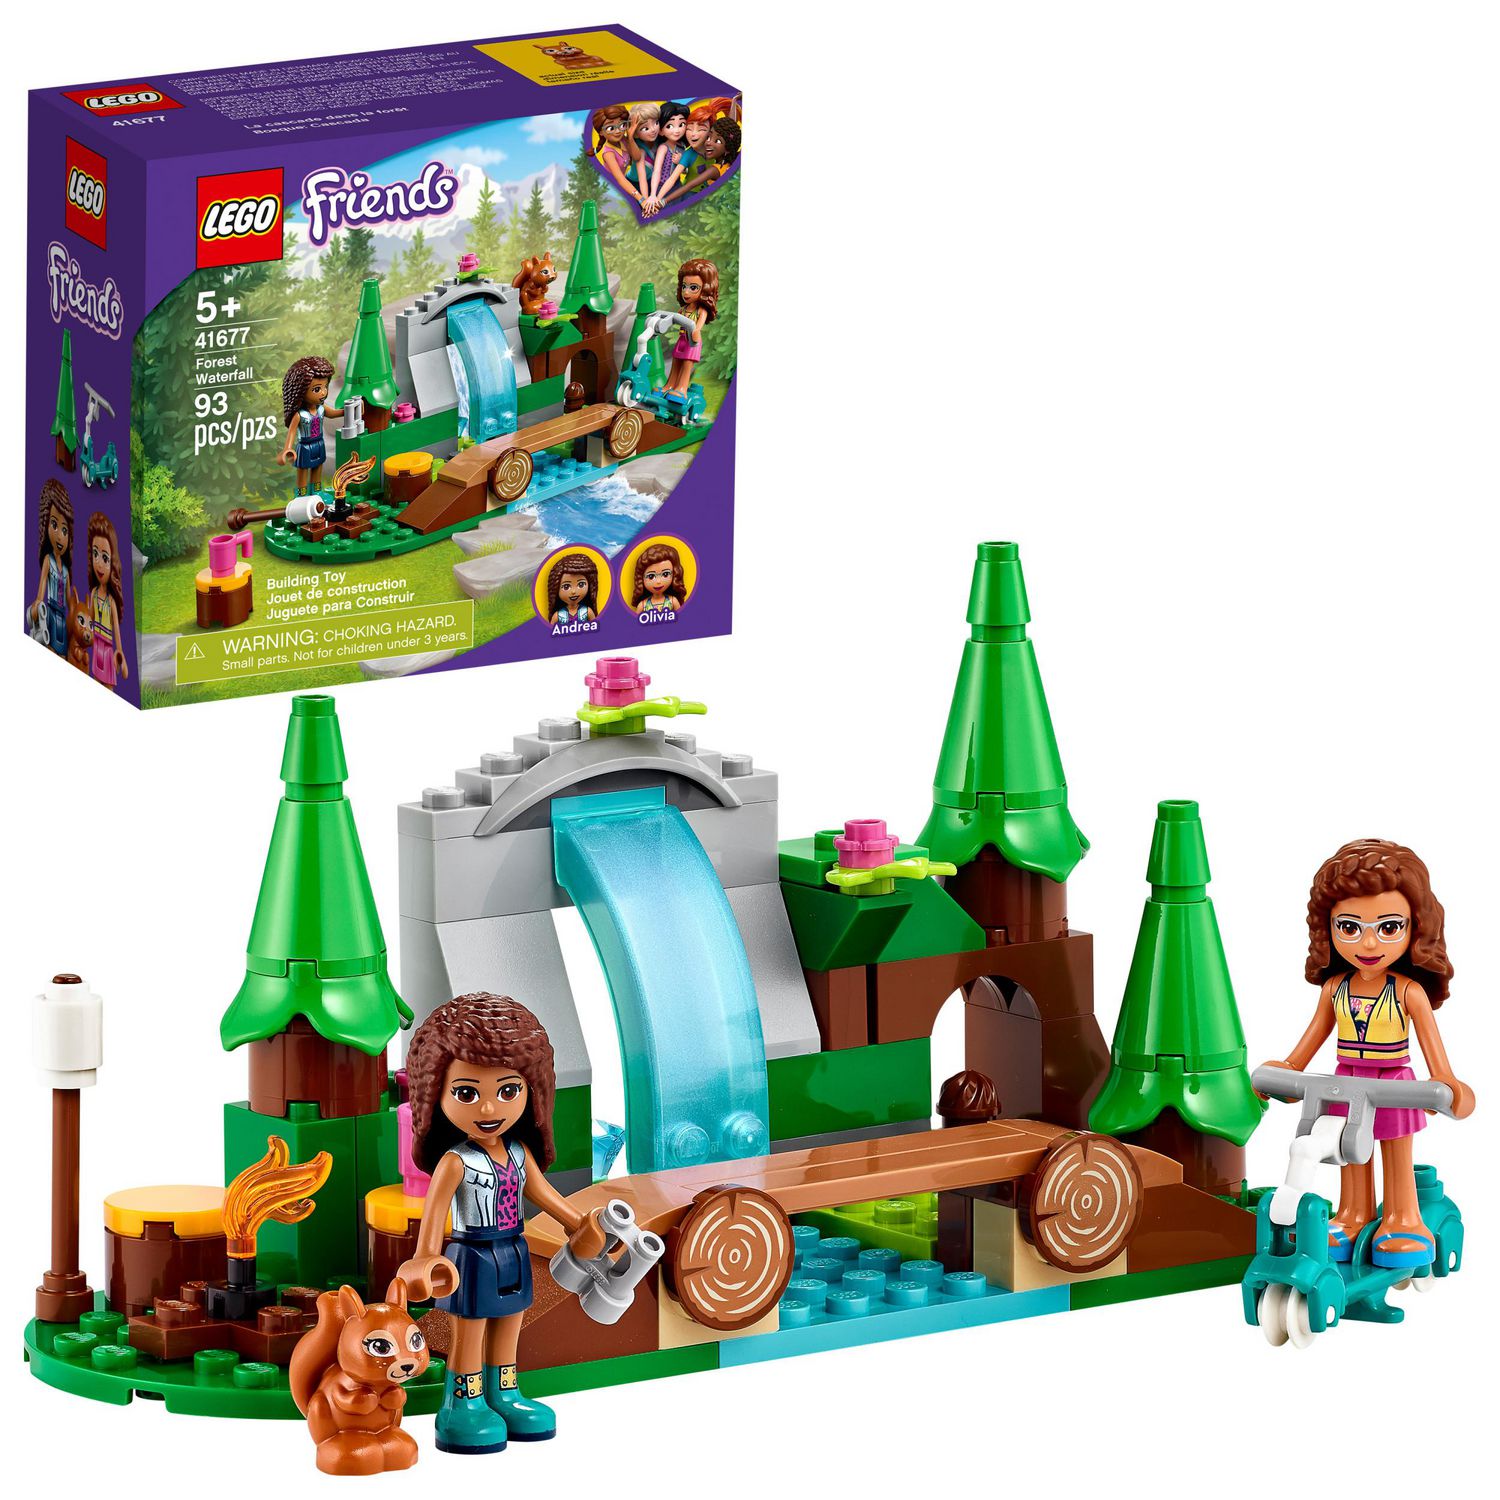 LEGO Friends Forest Waterfall 41677 Toy Building Kit (93 Pieces) | Walmart  Canada